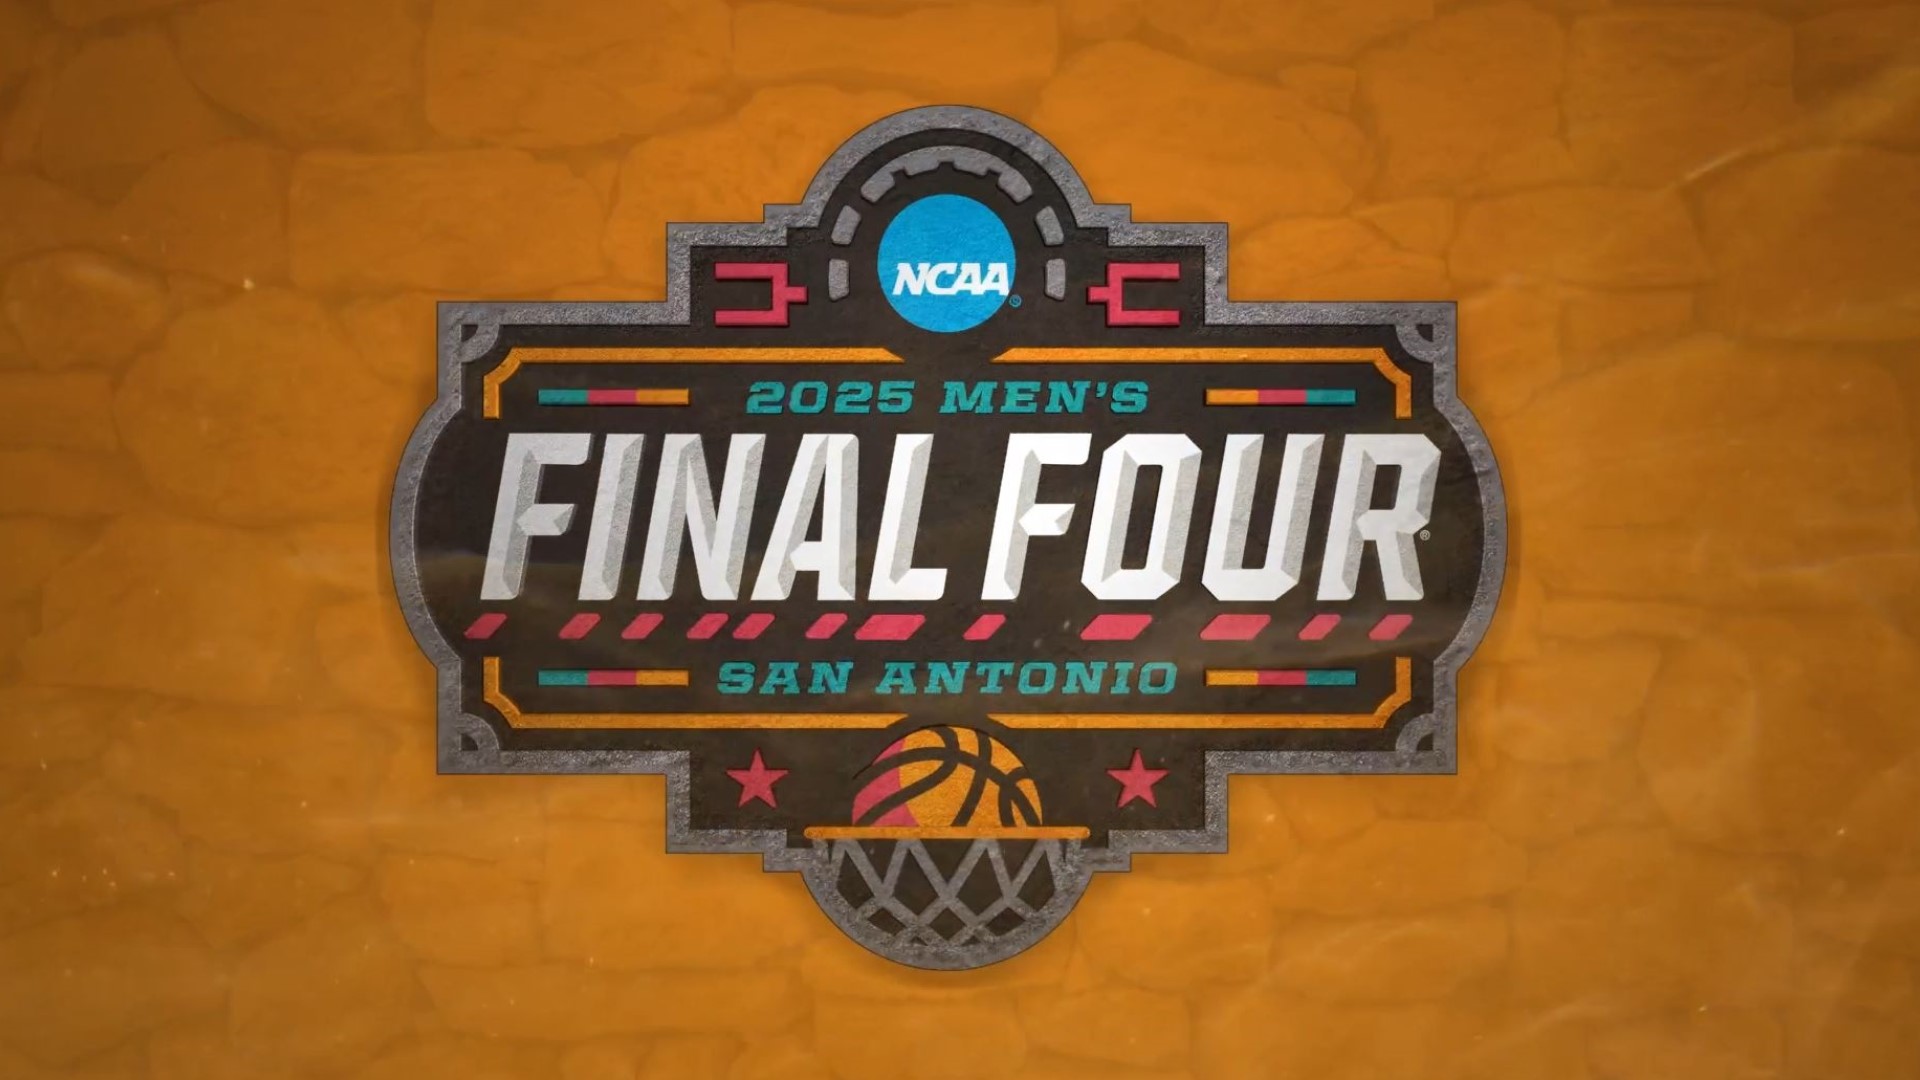 This will mark the fifth time the Alamo City has played host to the semichampionship and championship games of the men's college basketball tourney.